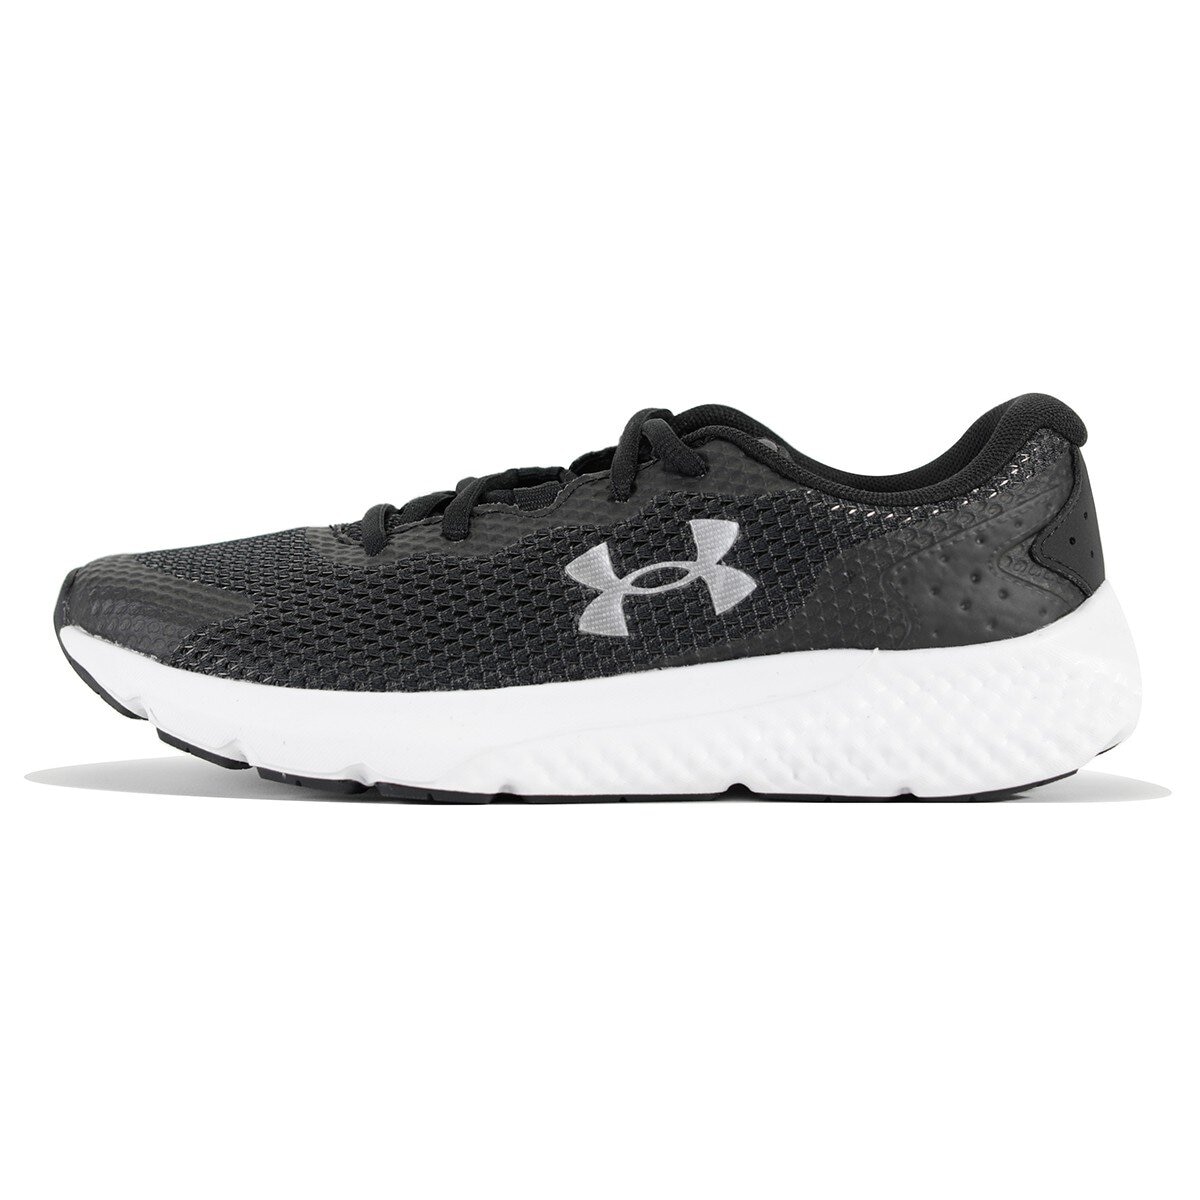 Under Armour 女 Charged Rogue 3 慢跑鞋 黑